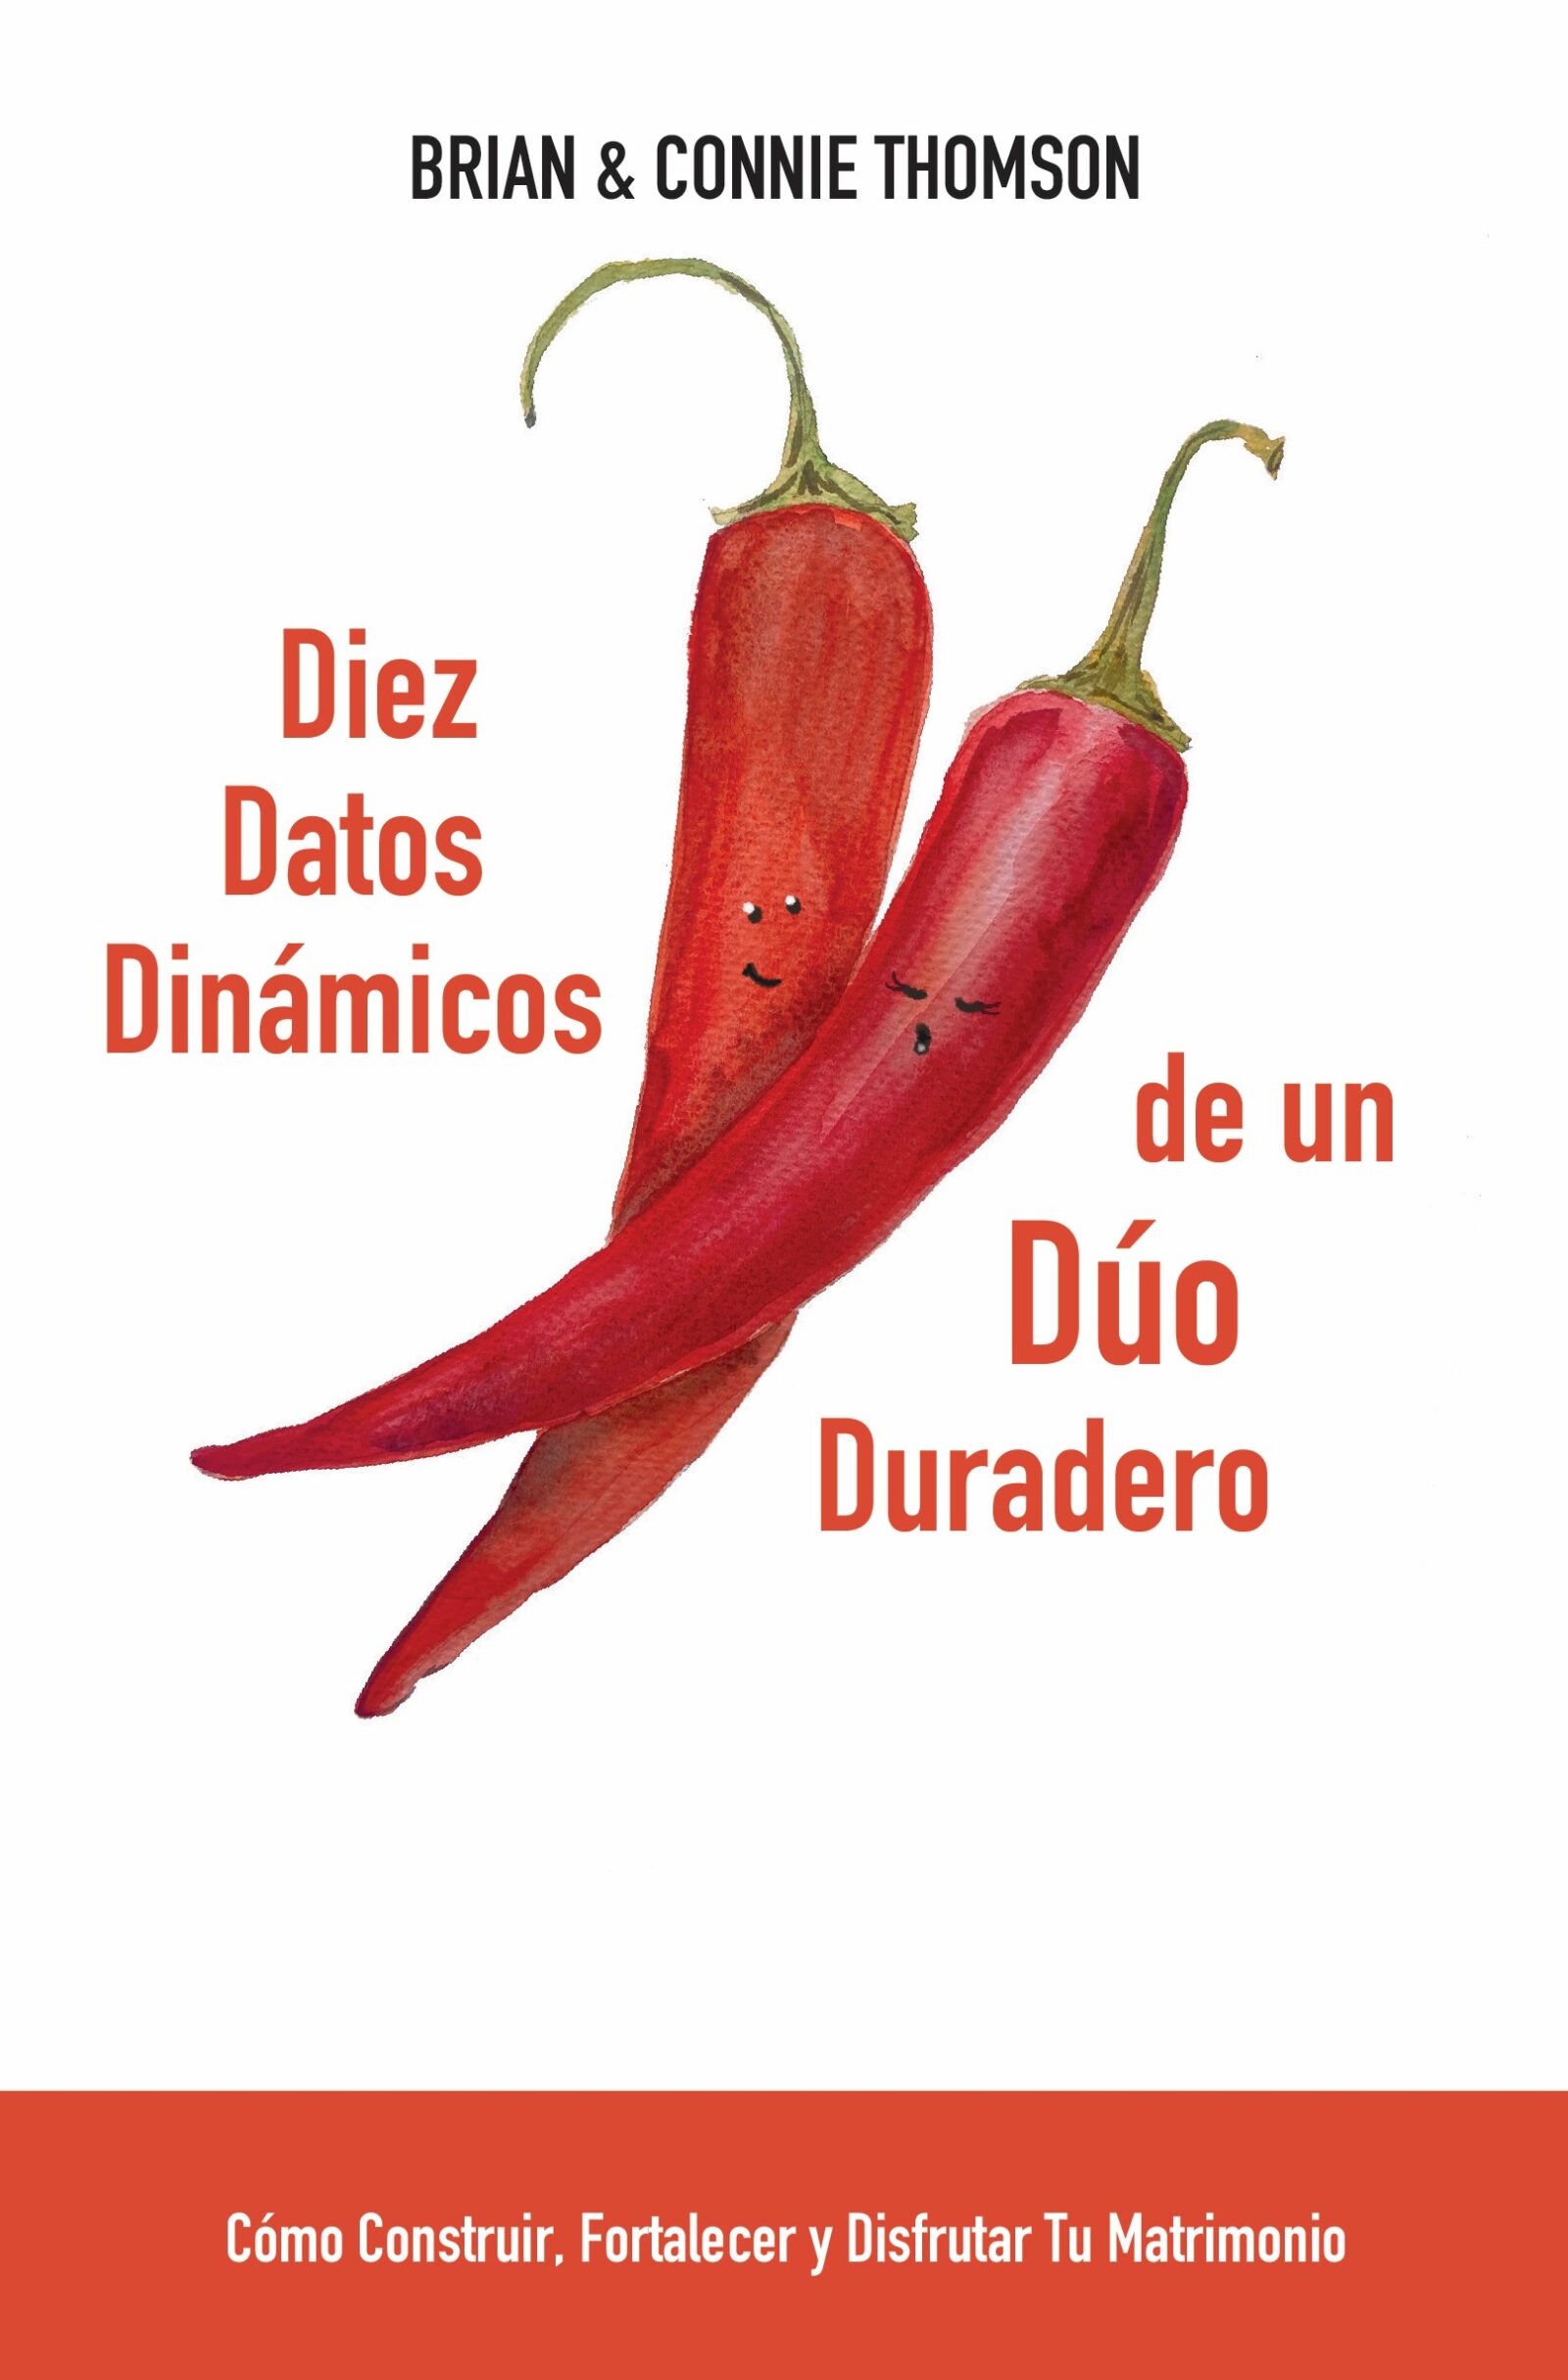 marriage book cover in spanish